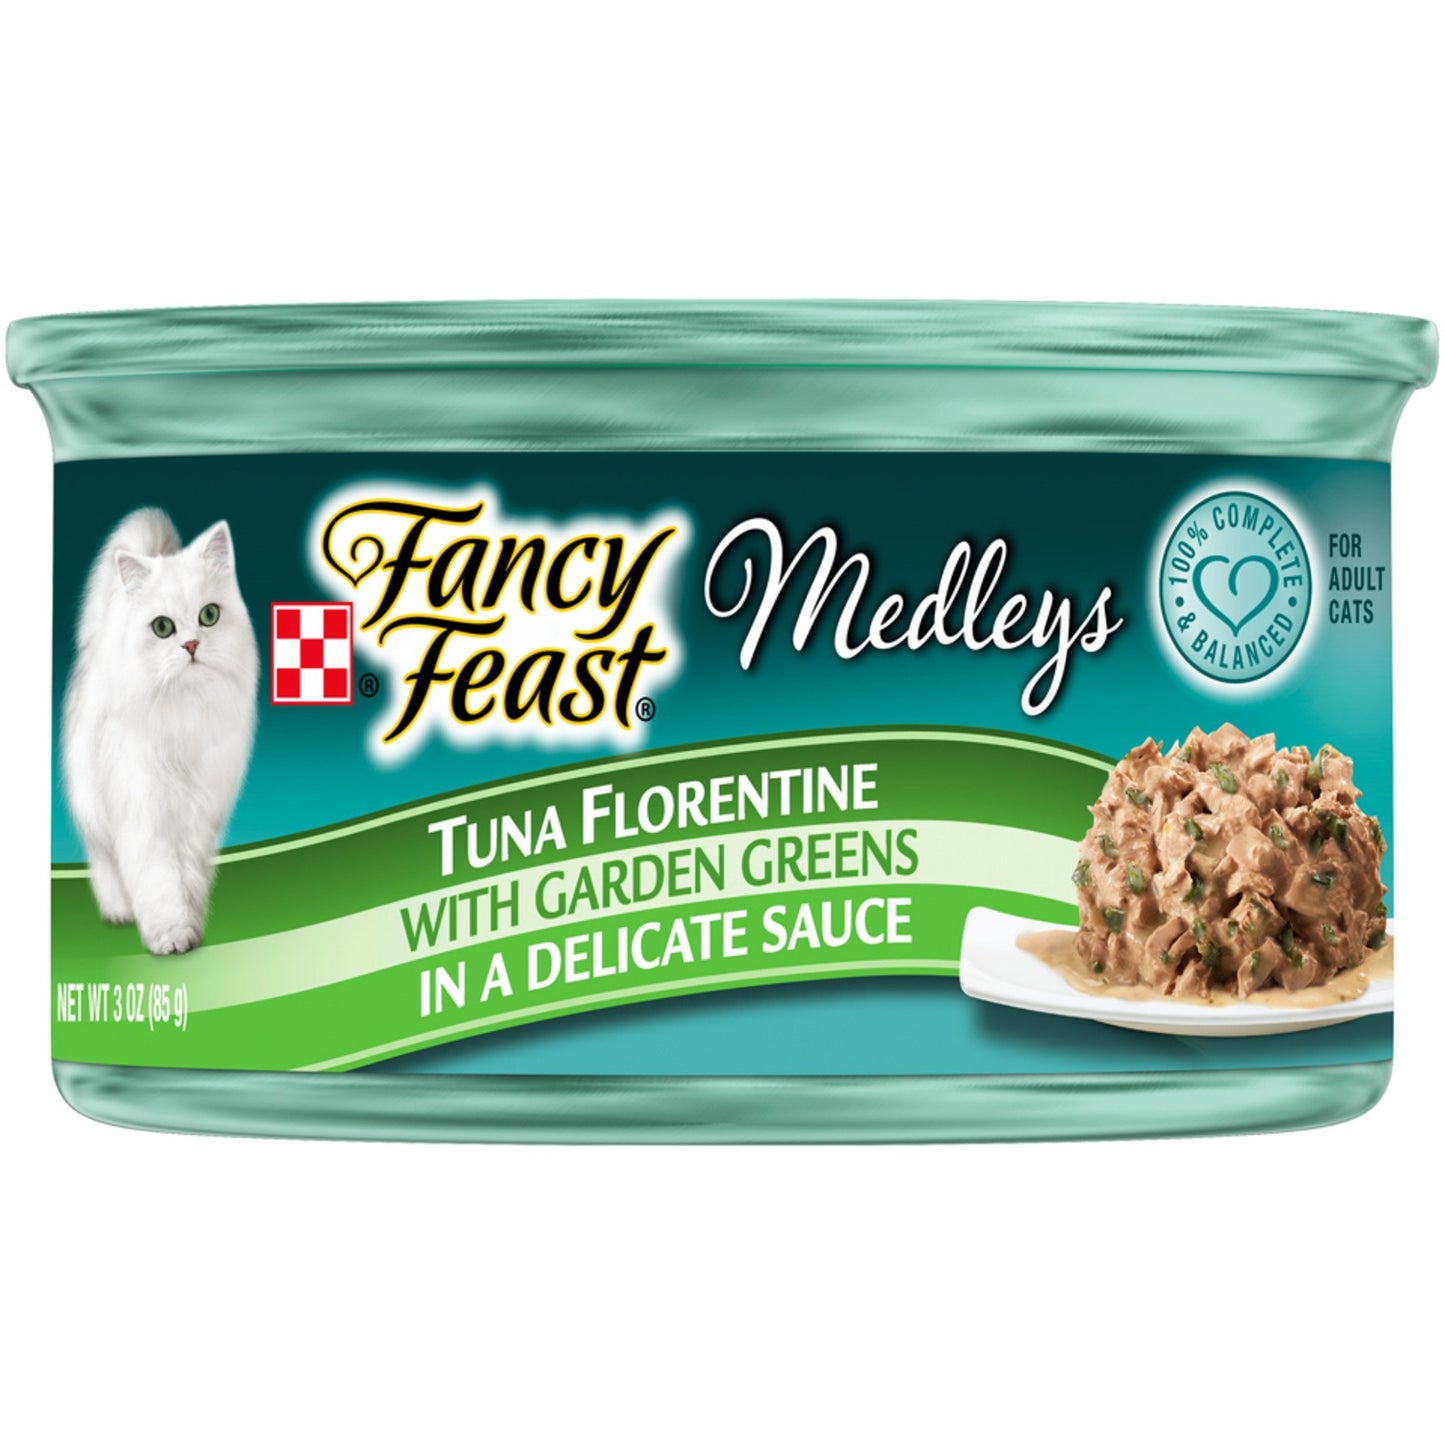 (24 Pack) Fancy Feast Wet Cat Food, Medleys Tuna Florentine With Garden Greens in a Delicate Sauce, 3 oz. Cans